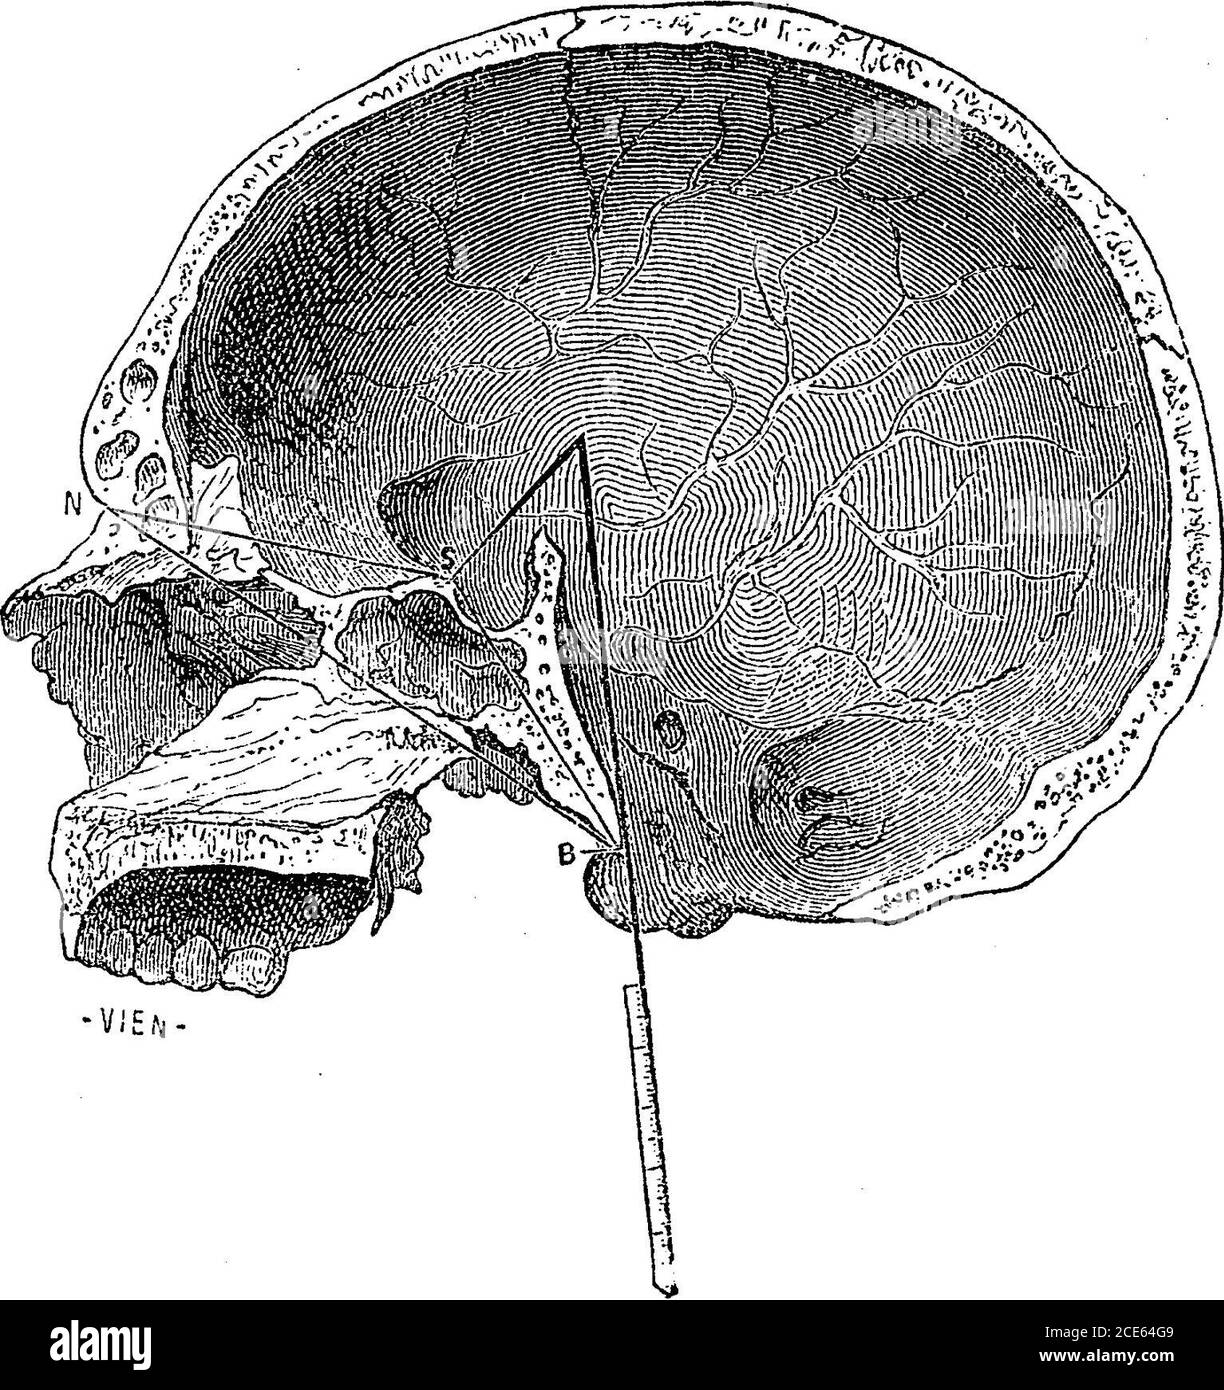 . Anthropology . etafacial angle of Serres, which the pterygoidprocesses form with the base of the skull. It seems to us to varywith the prognathism, but not very much. (b) The corono-facialangle of Gratiolet, formed by the meeting of the plane passingacross the coronal suture of both sides and the facial line ofCamper, (c) The naso-basal angle, described at page 255. (d) The * Sur les Cranes Basques de Zaraus, in Mem. dAnthrop./ by PauBroca, vol. ii. p. 28. u 2 292 SPHENOIDAL ANGLE. [Chap. hi. sphenoidal angle of Welcker. (e) The angle of Barclay. (/) Thecranio-facial angle of Huxley, which d Stock Photo